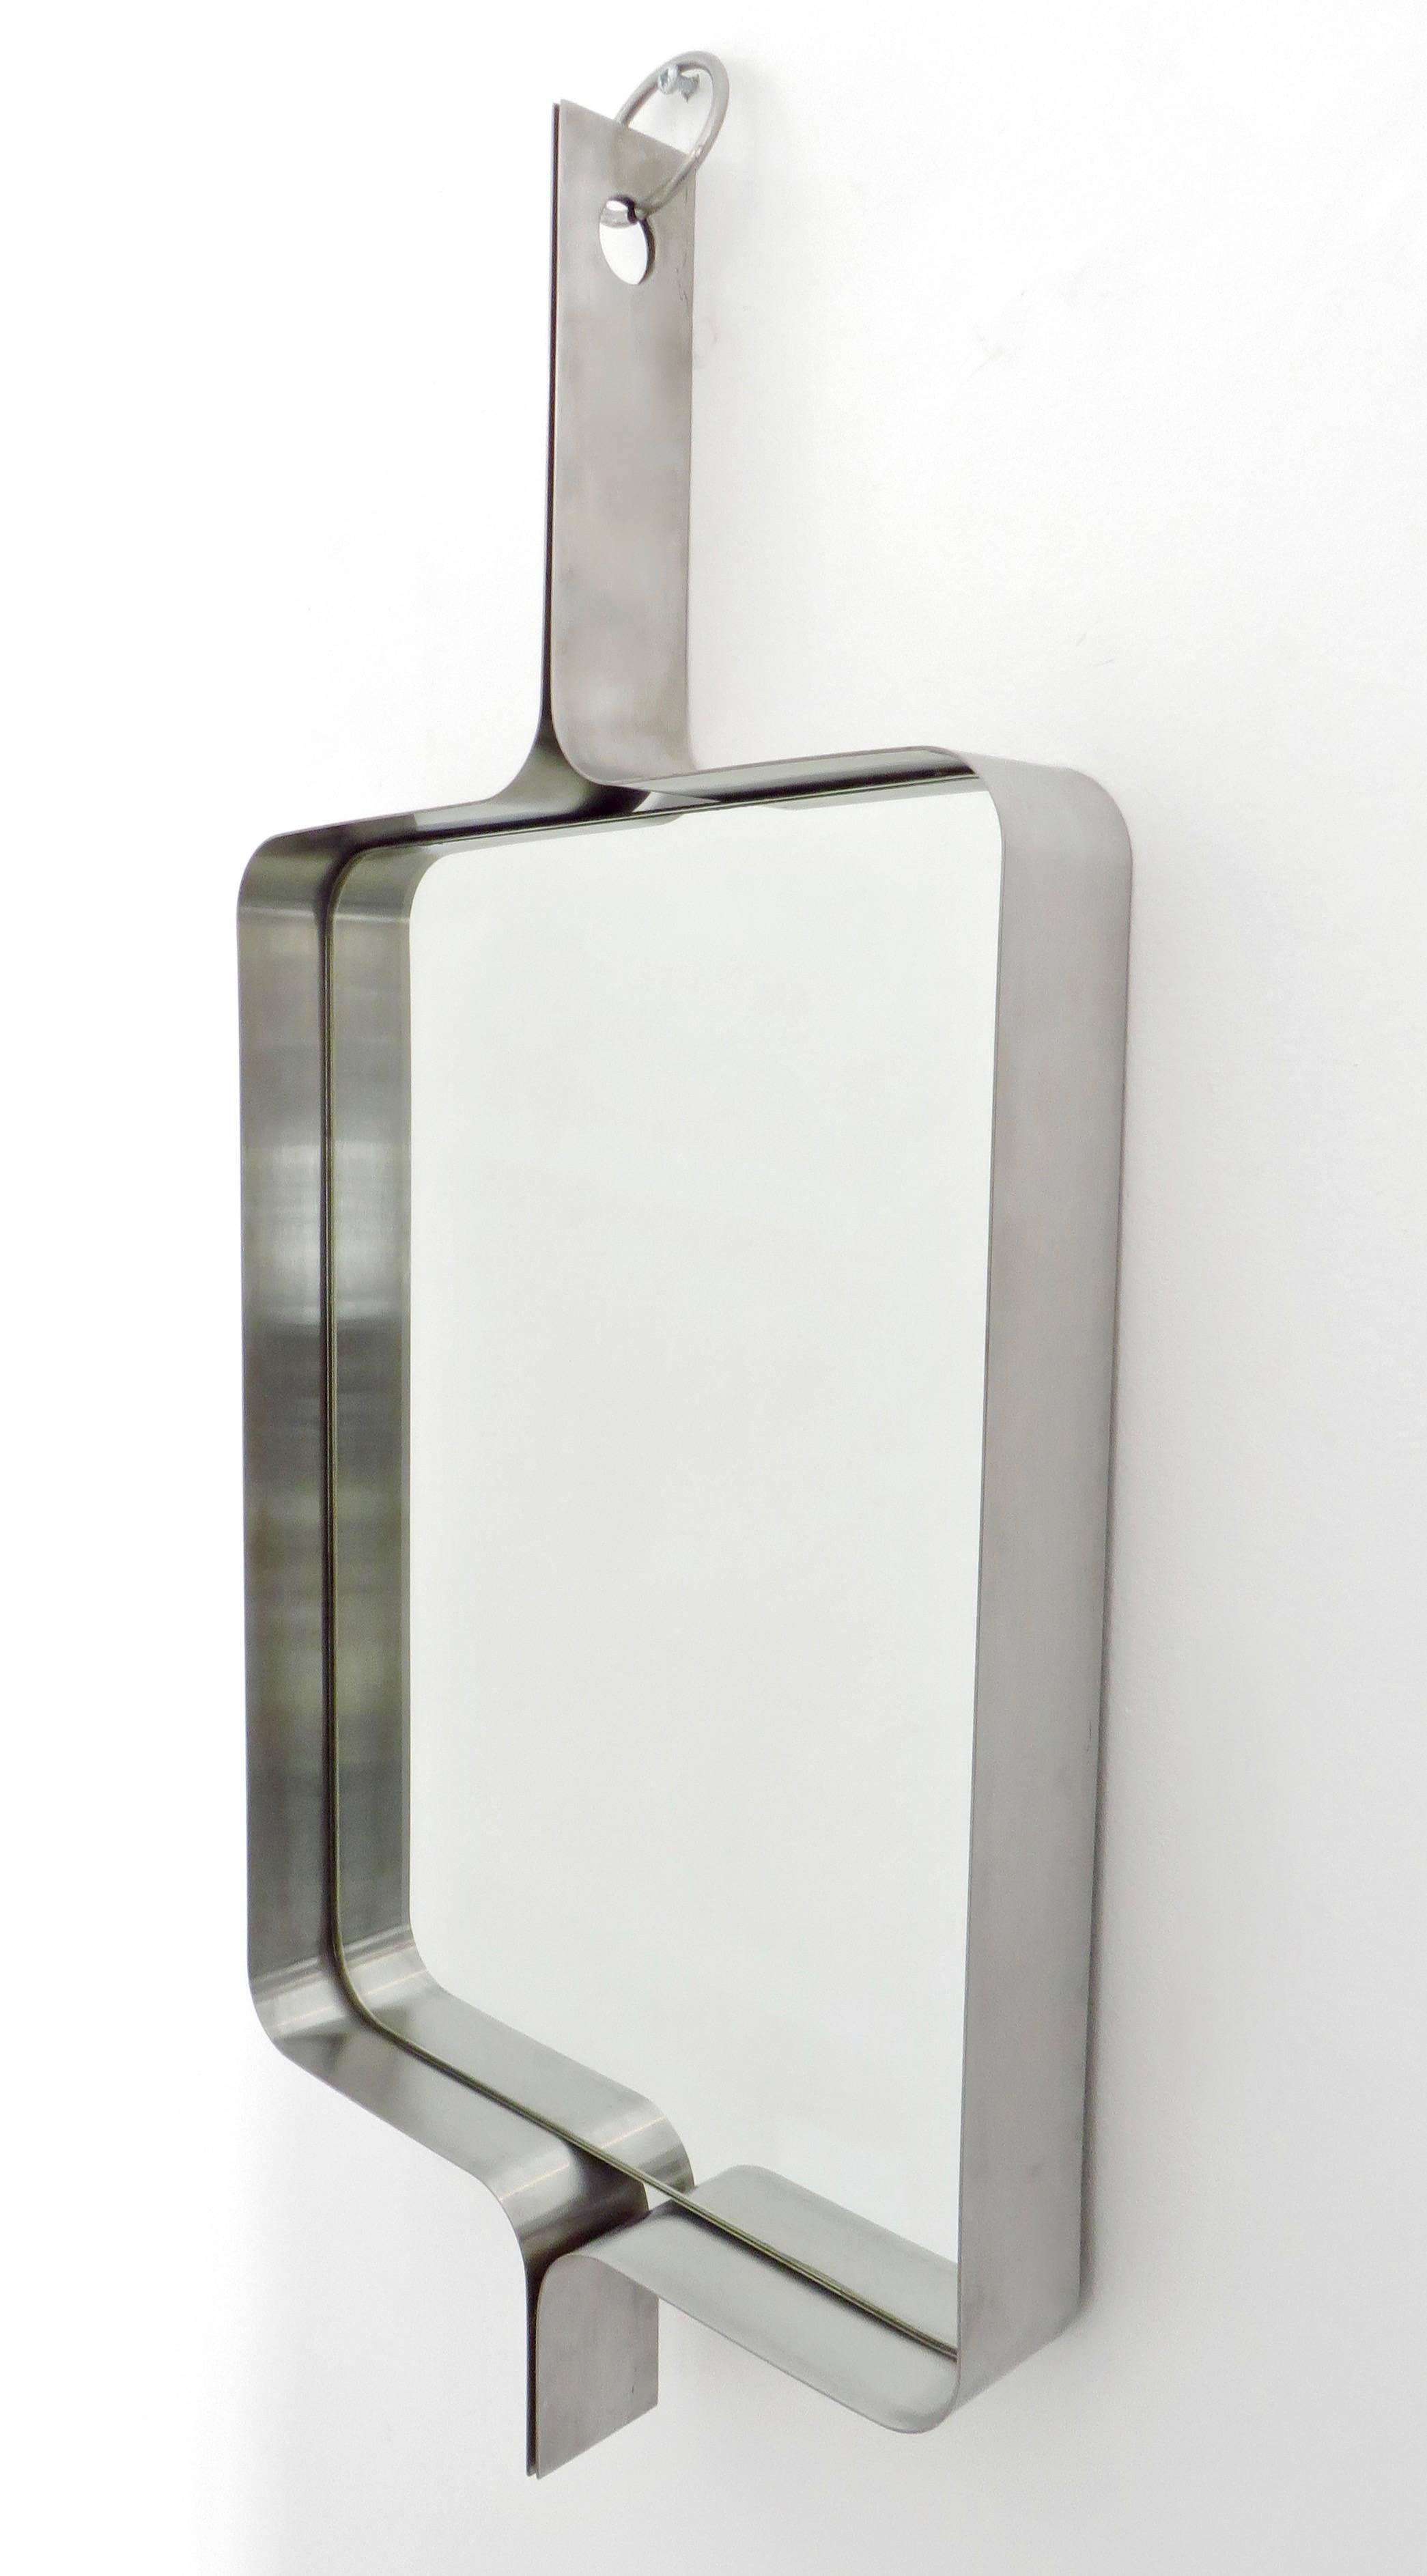 A Xavier-Feal French rectangular brushed stainless steel wall mirror, circa 1970.
Produced by Inox Industrie, circa 1970.
This mirror was previously attributed to Michel Boyer.
Excellent condition with no scratches or dents.
The mirror glass